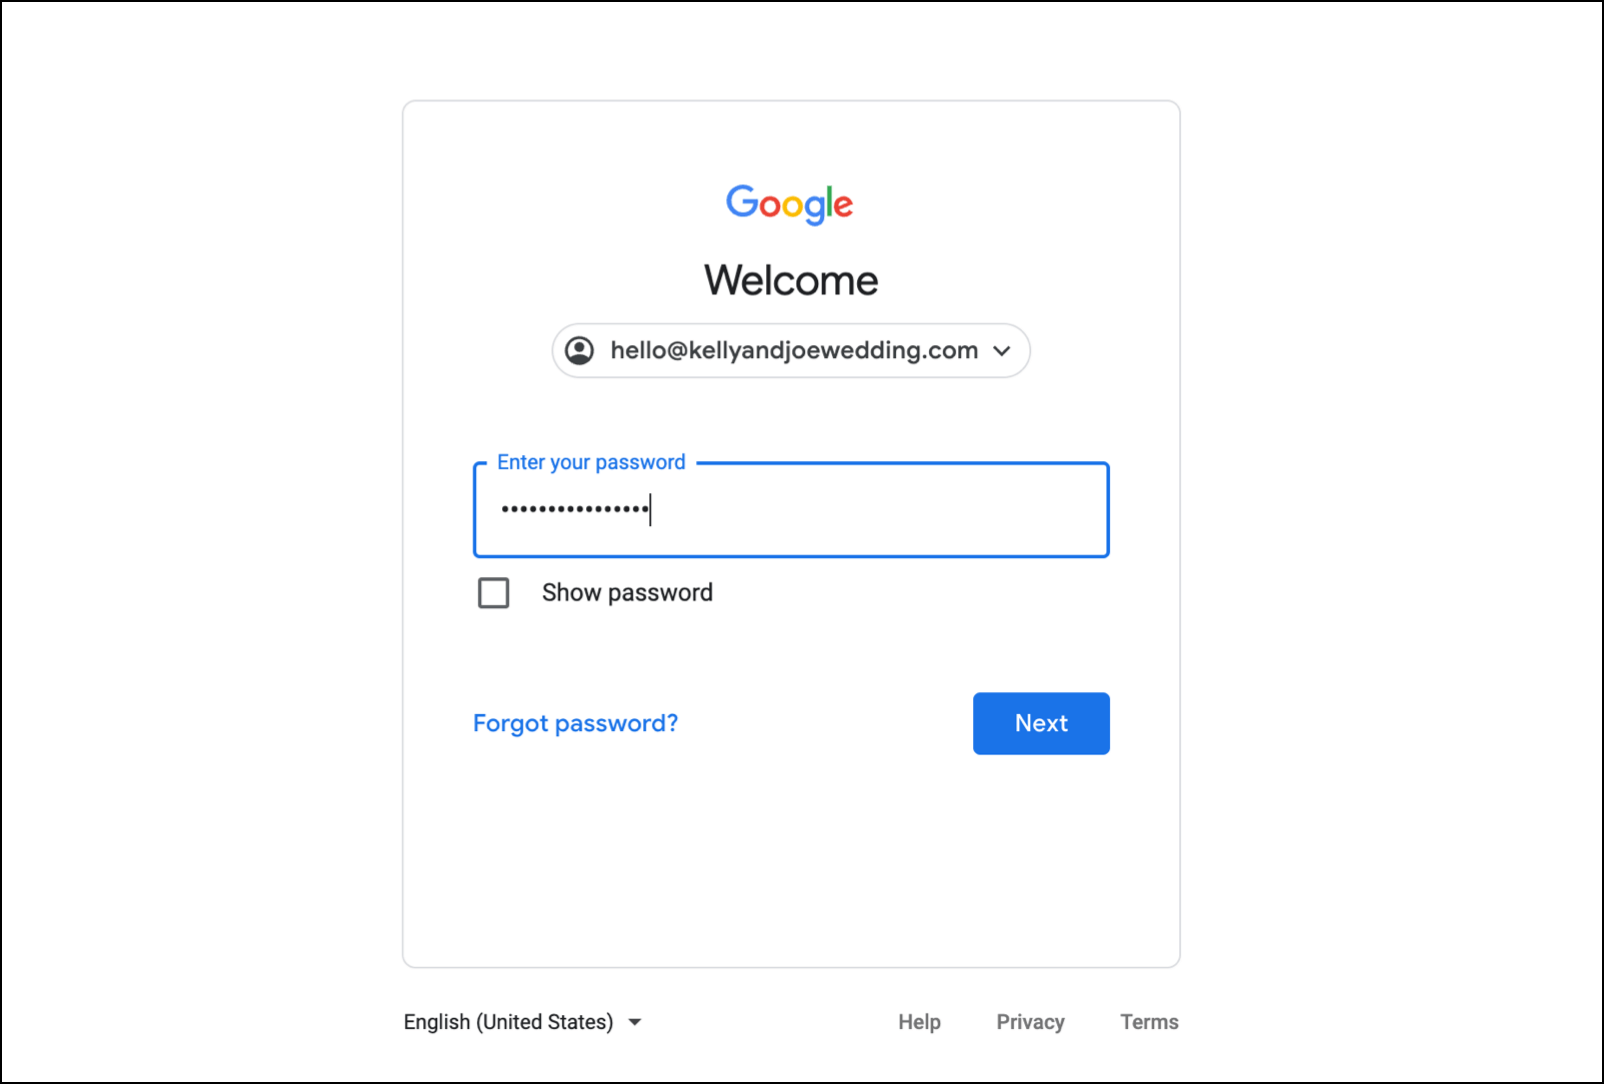 Log into your new email